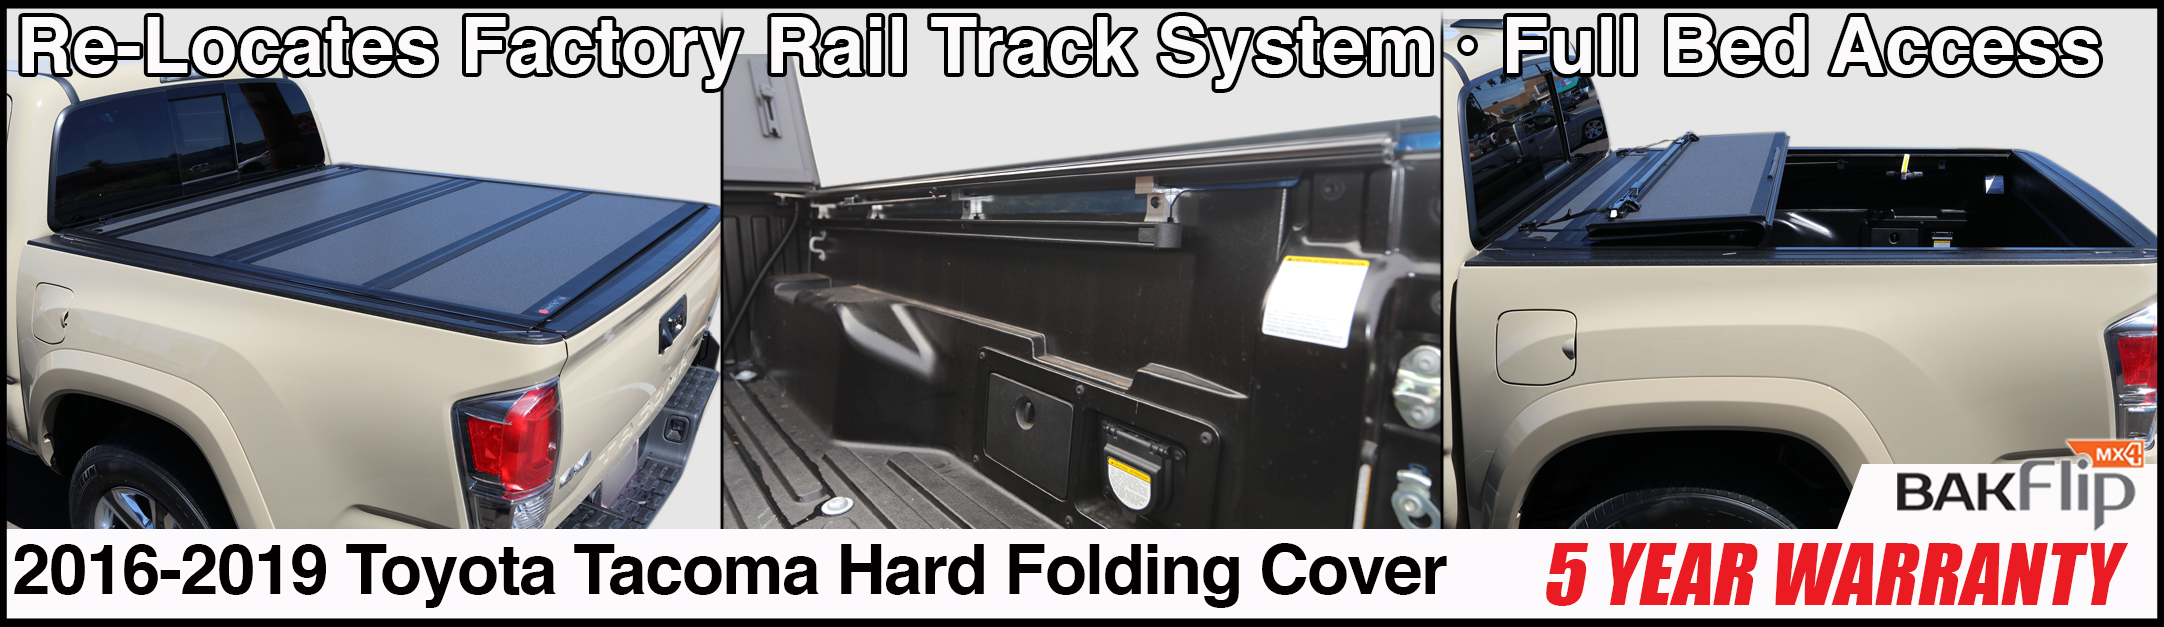 Toyota Tacoma Waterproof Bed Cover